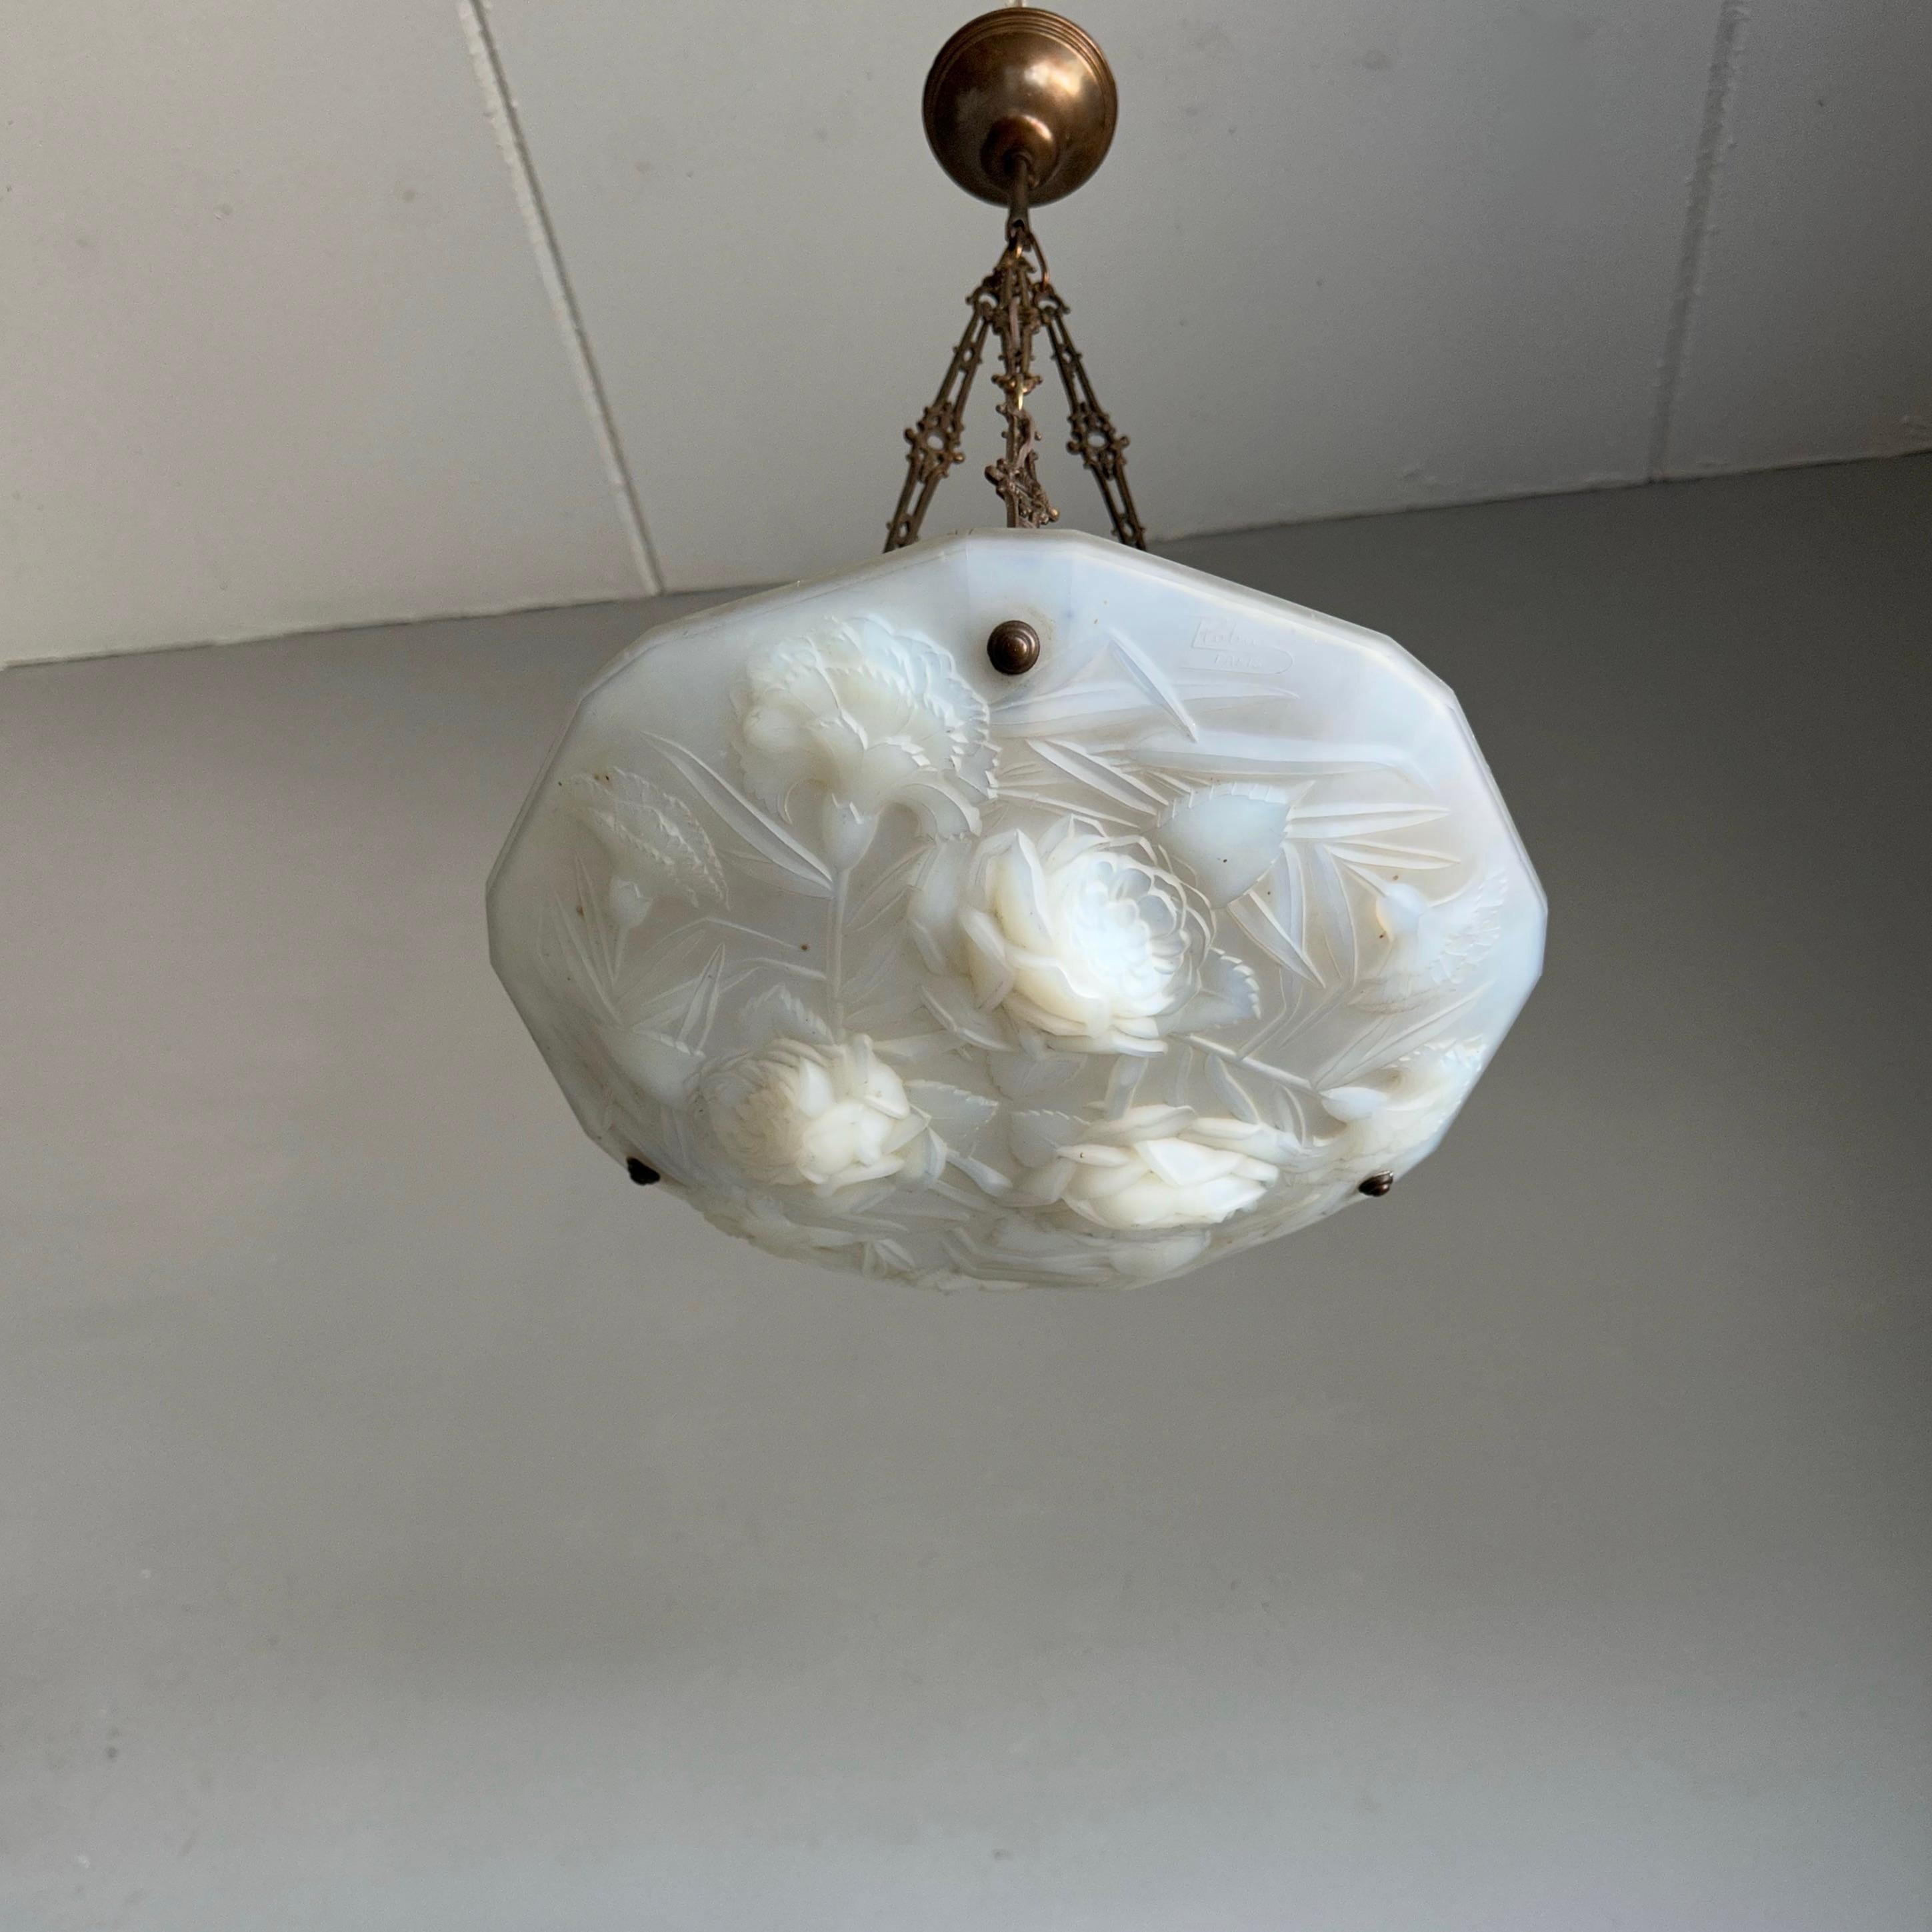 Very stylish and rare, 1920s Art Deco pendant light with a beautiful color.

When we first saw this rare, practical size and highly decorative Art Deco pendant we immediately knew it had to become ours. The wonderful design and flower patterns